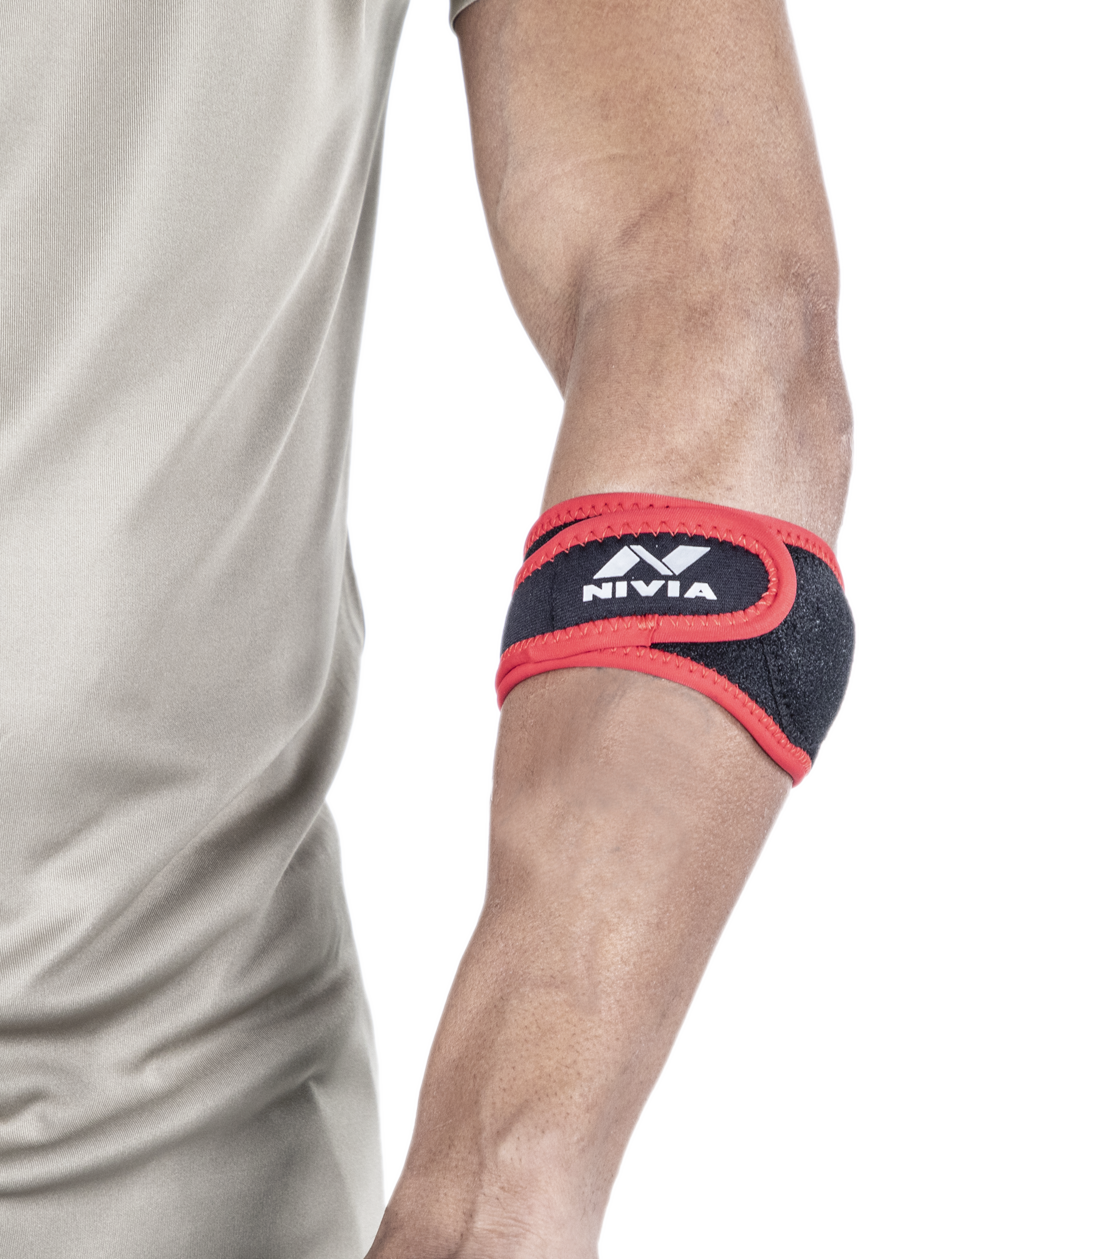 NIVIA Orthopedic Performance Tennis Elbow Support - Red And Black